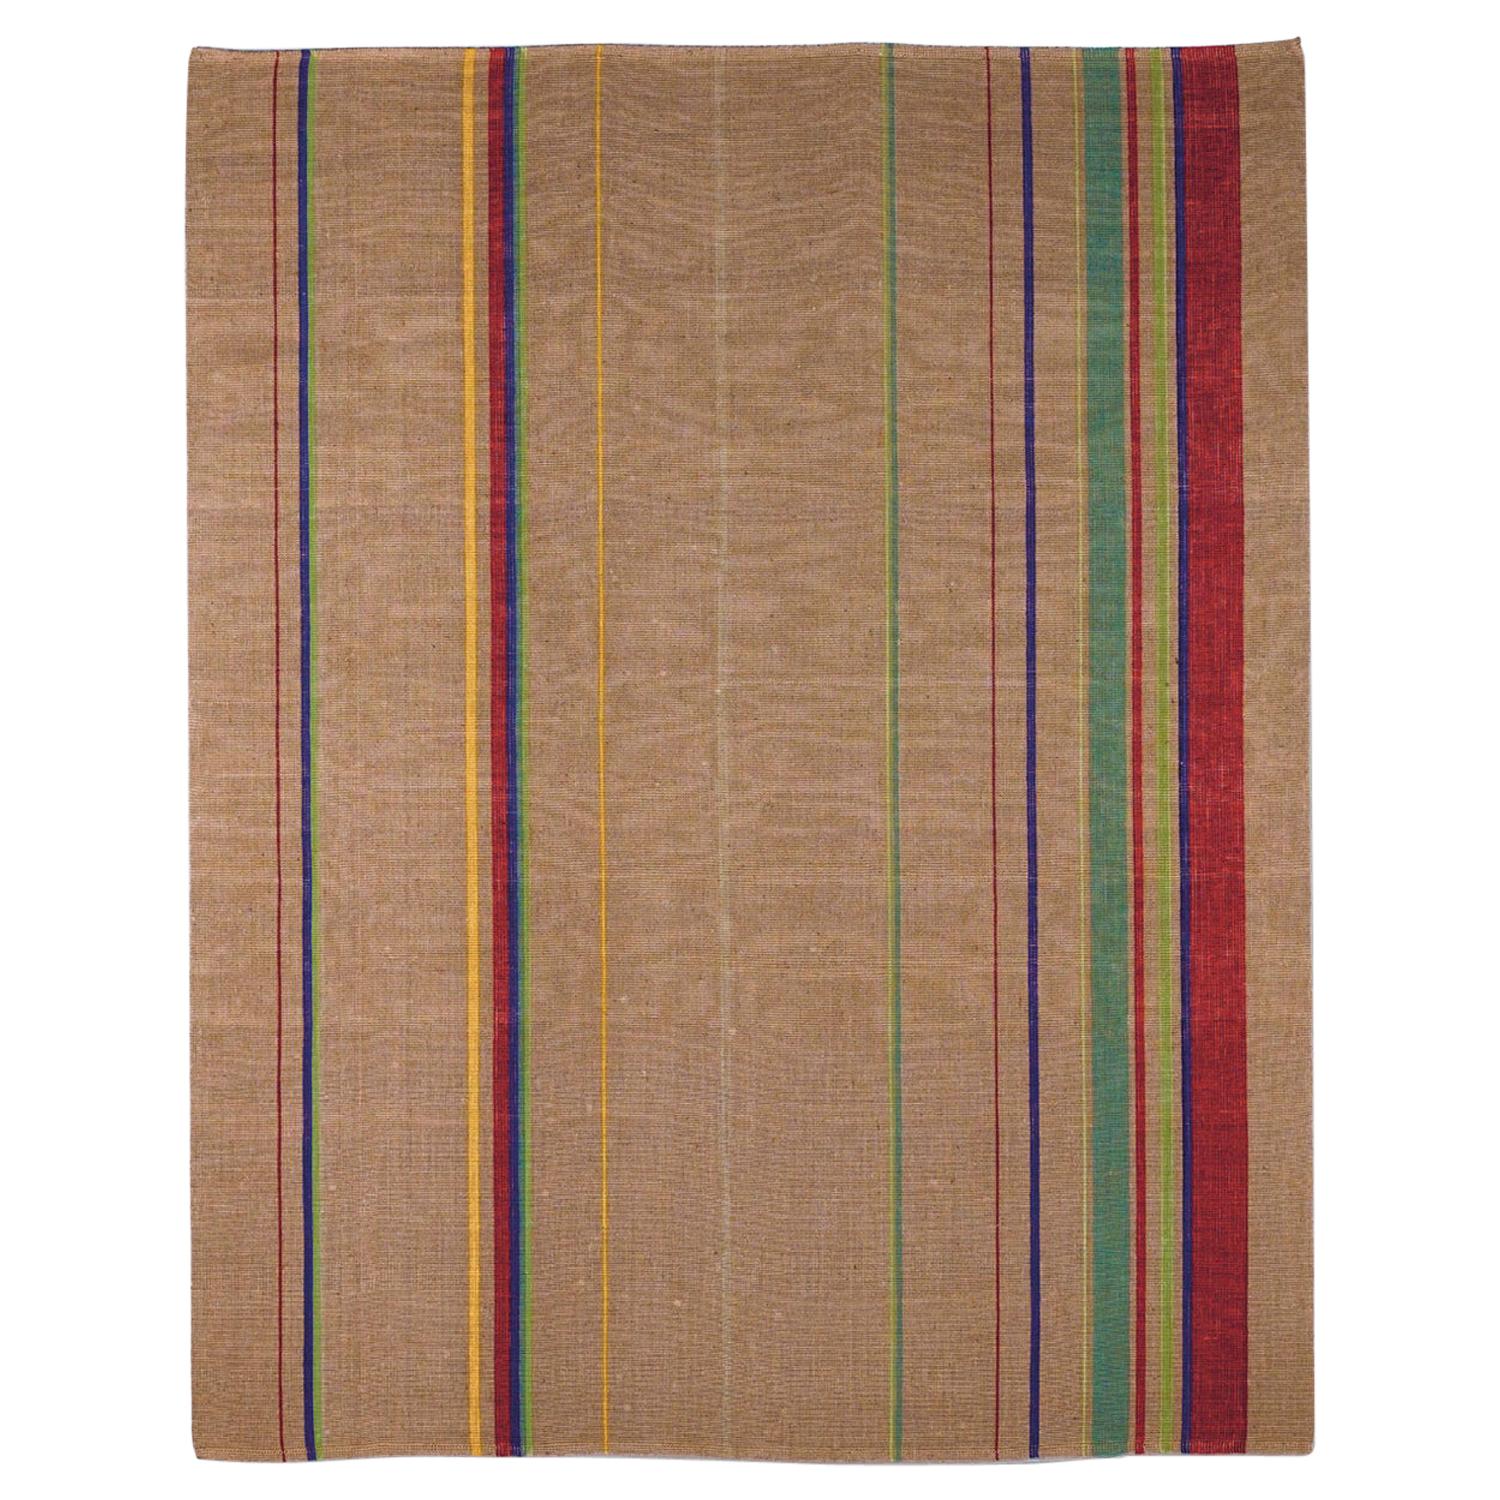 Nature Inspired Striped Spring Thin Rug by Deanna Comellini In Stock 200x250 cm